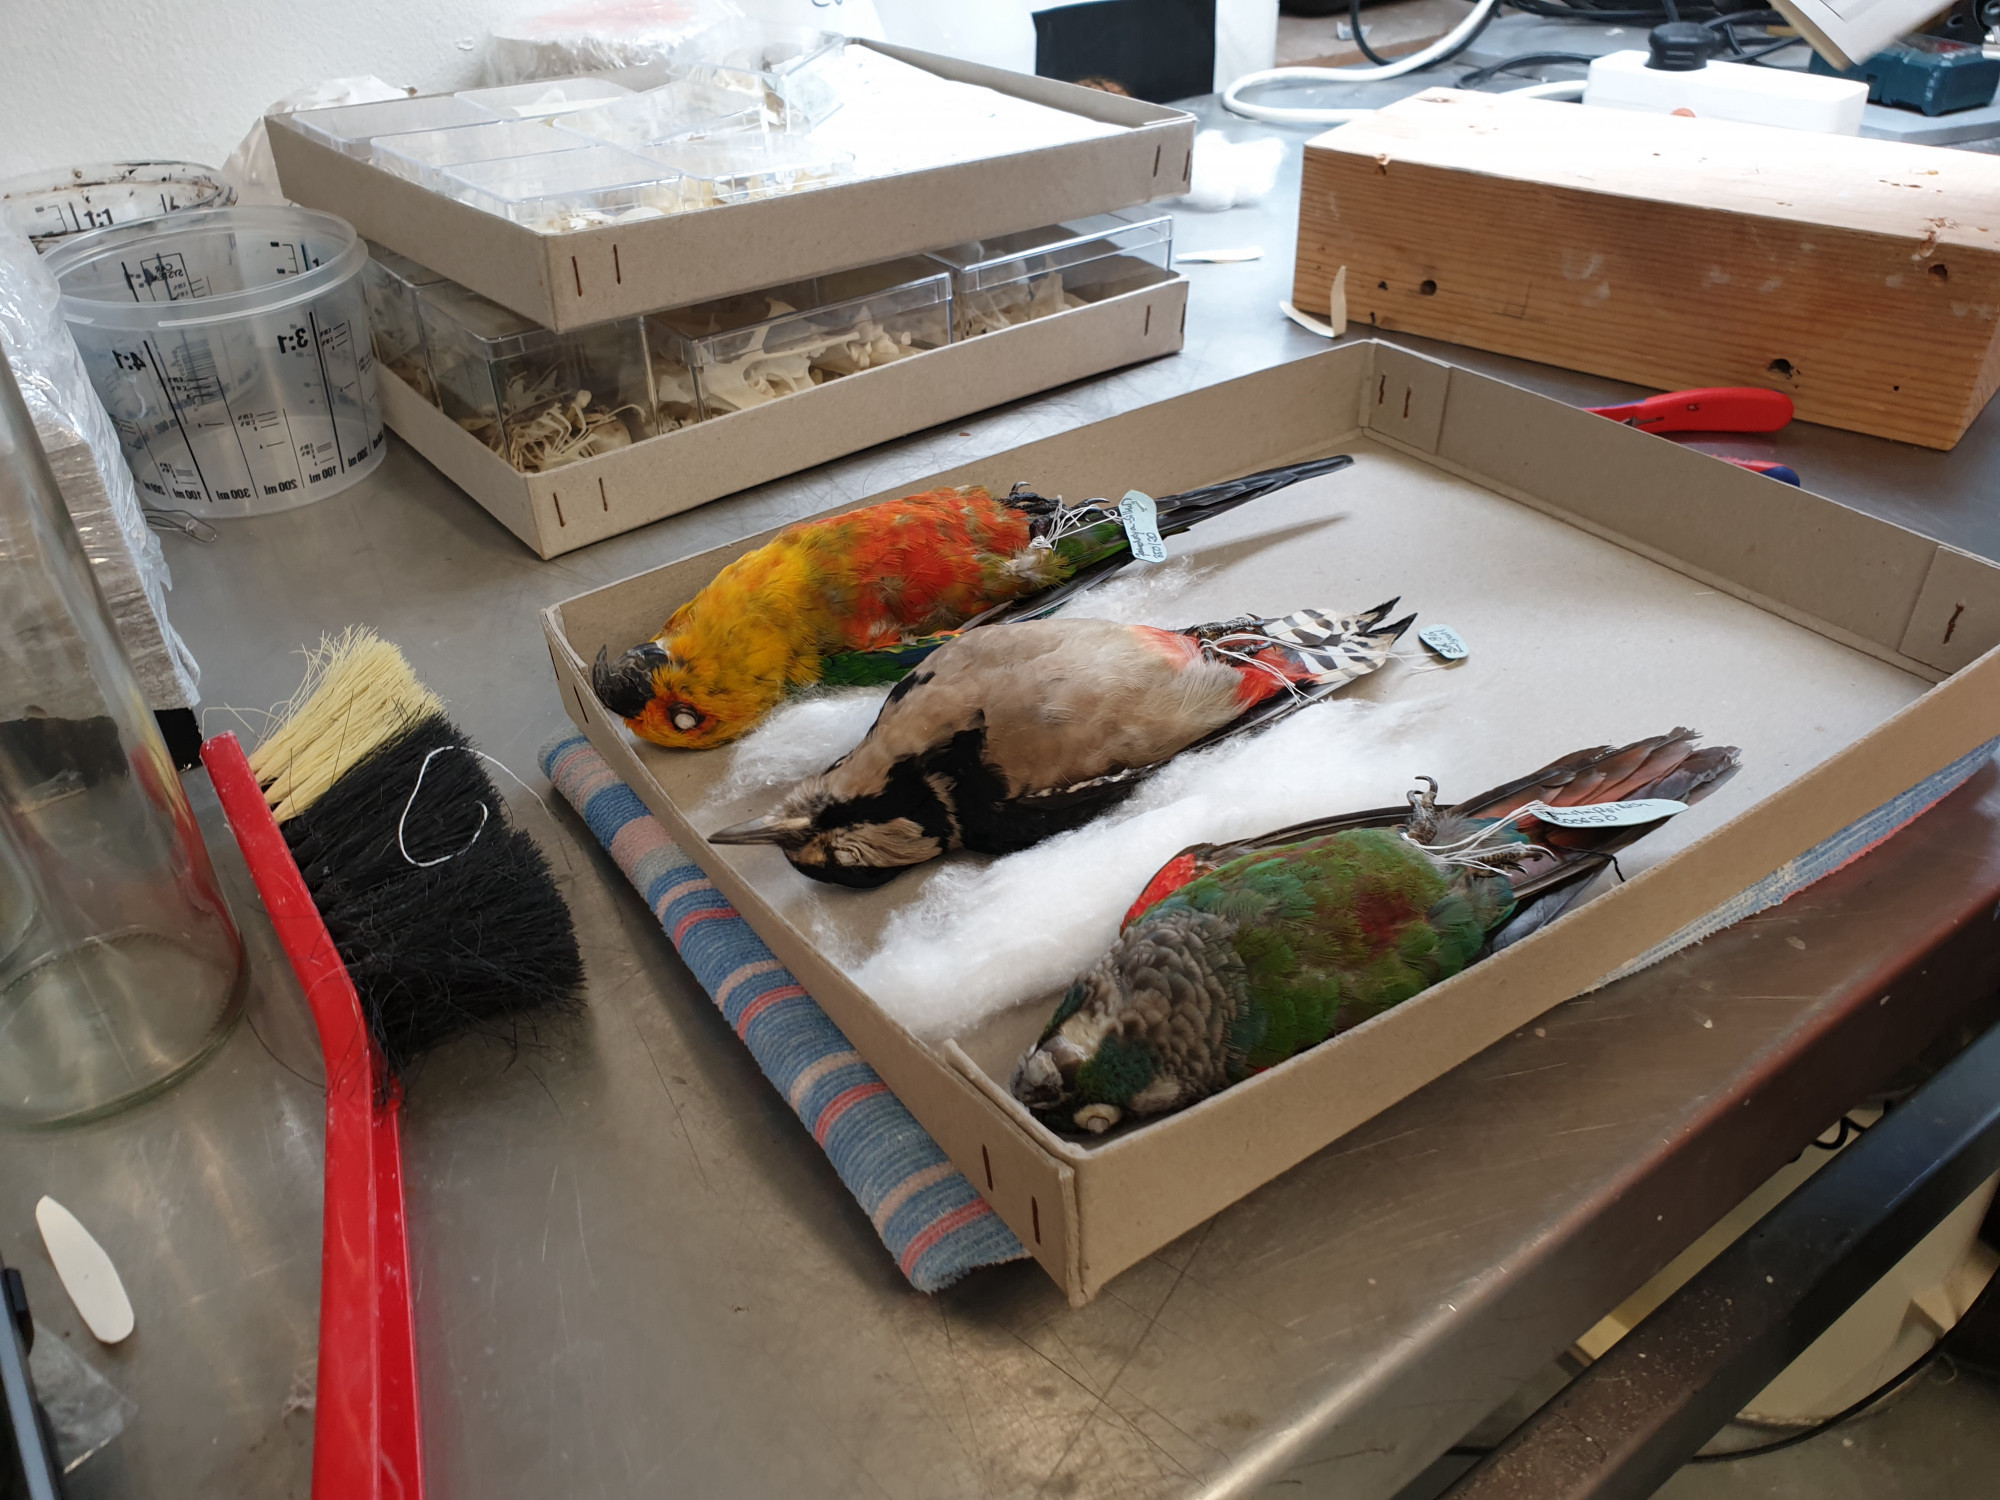 Various objects lie on a metal tray, including a brush, a beaker, and various cases. In the middle of the photo is an open cardboard box that is partially filled with cotton wool in which three bodies of different coloured dead birds are lying on their back with their wings folded, their necks slightly outstretched, and their legs tied together.